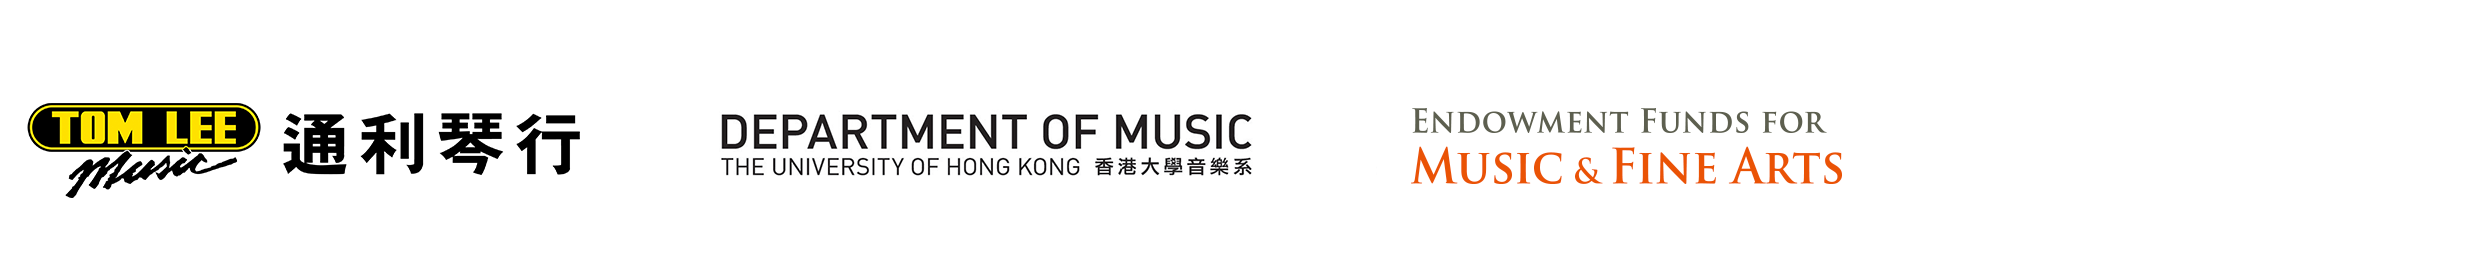 Tom Lee Music | Department of Music, HKU | Endowment Fund for Music & Fine Arts